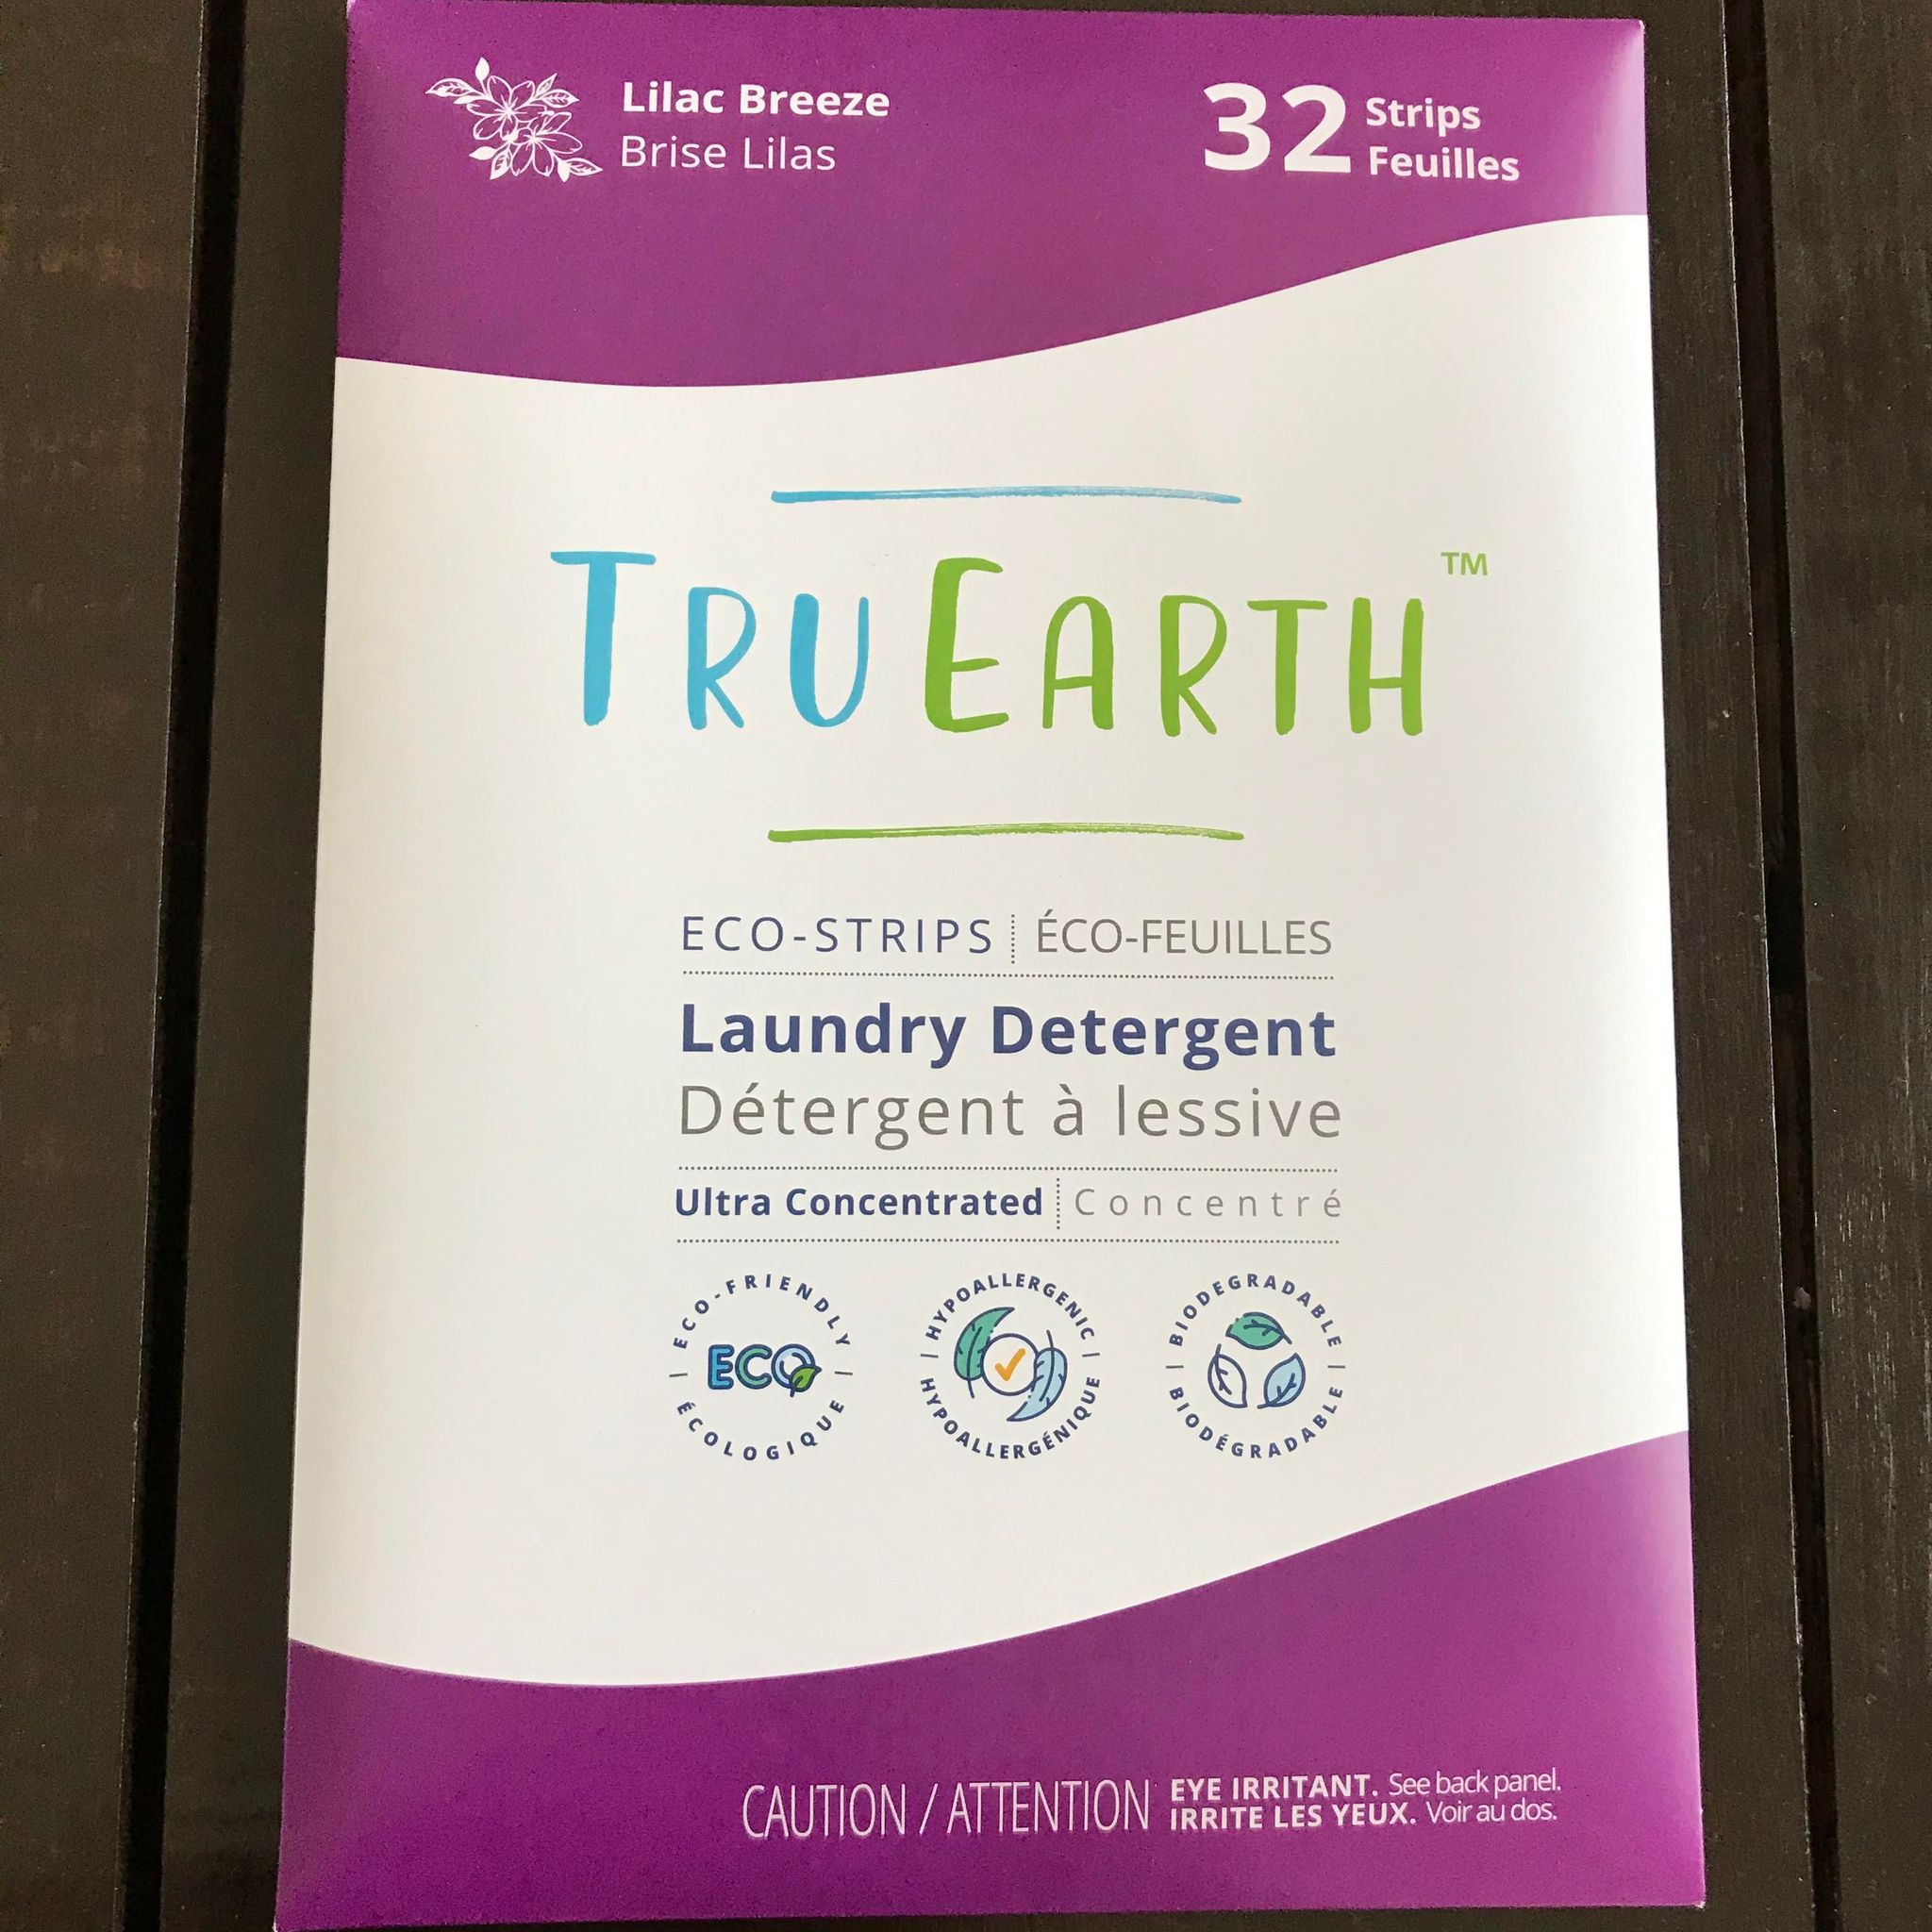 Lilac Breeze TruEarth ultra concentrated laundry detergent made in canada available in a zero waste pack of 32 eco strips